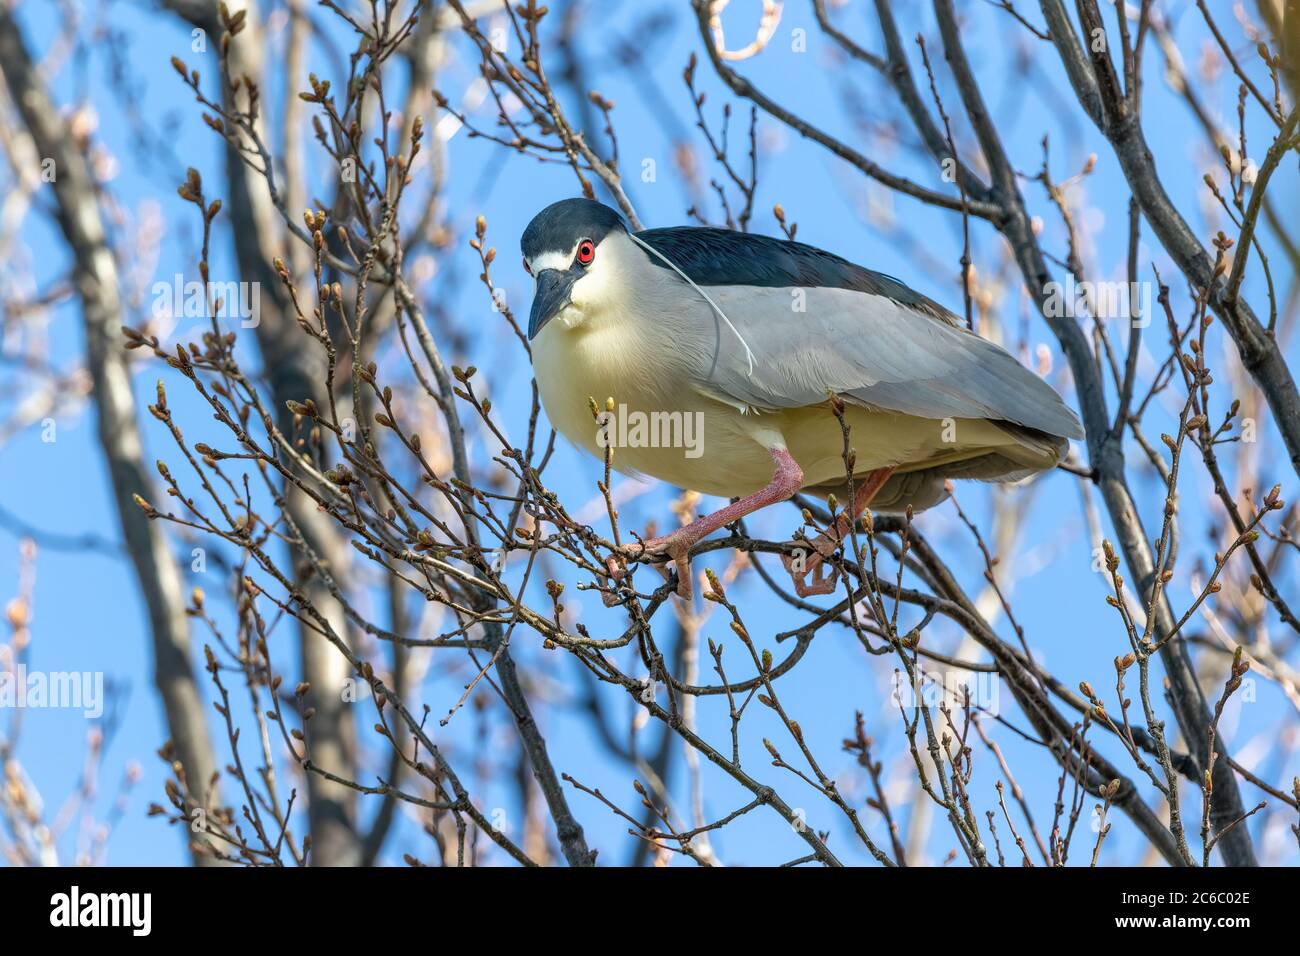 A close up of a Black-crowned Night Heron during mating and breeding season, with vibrant red eye, pink legs and feet, and long white head plumes. Stock Photo